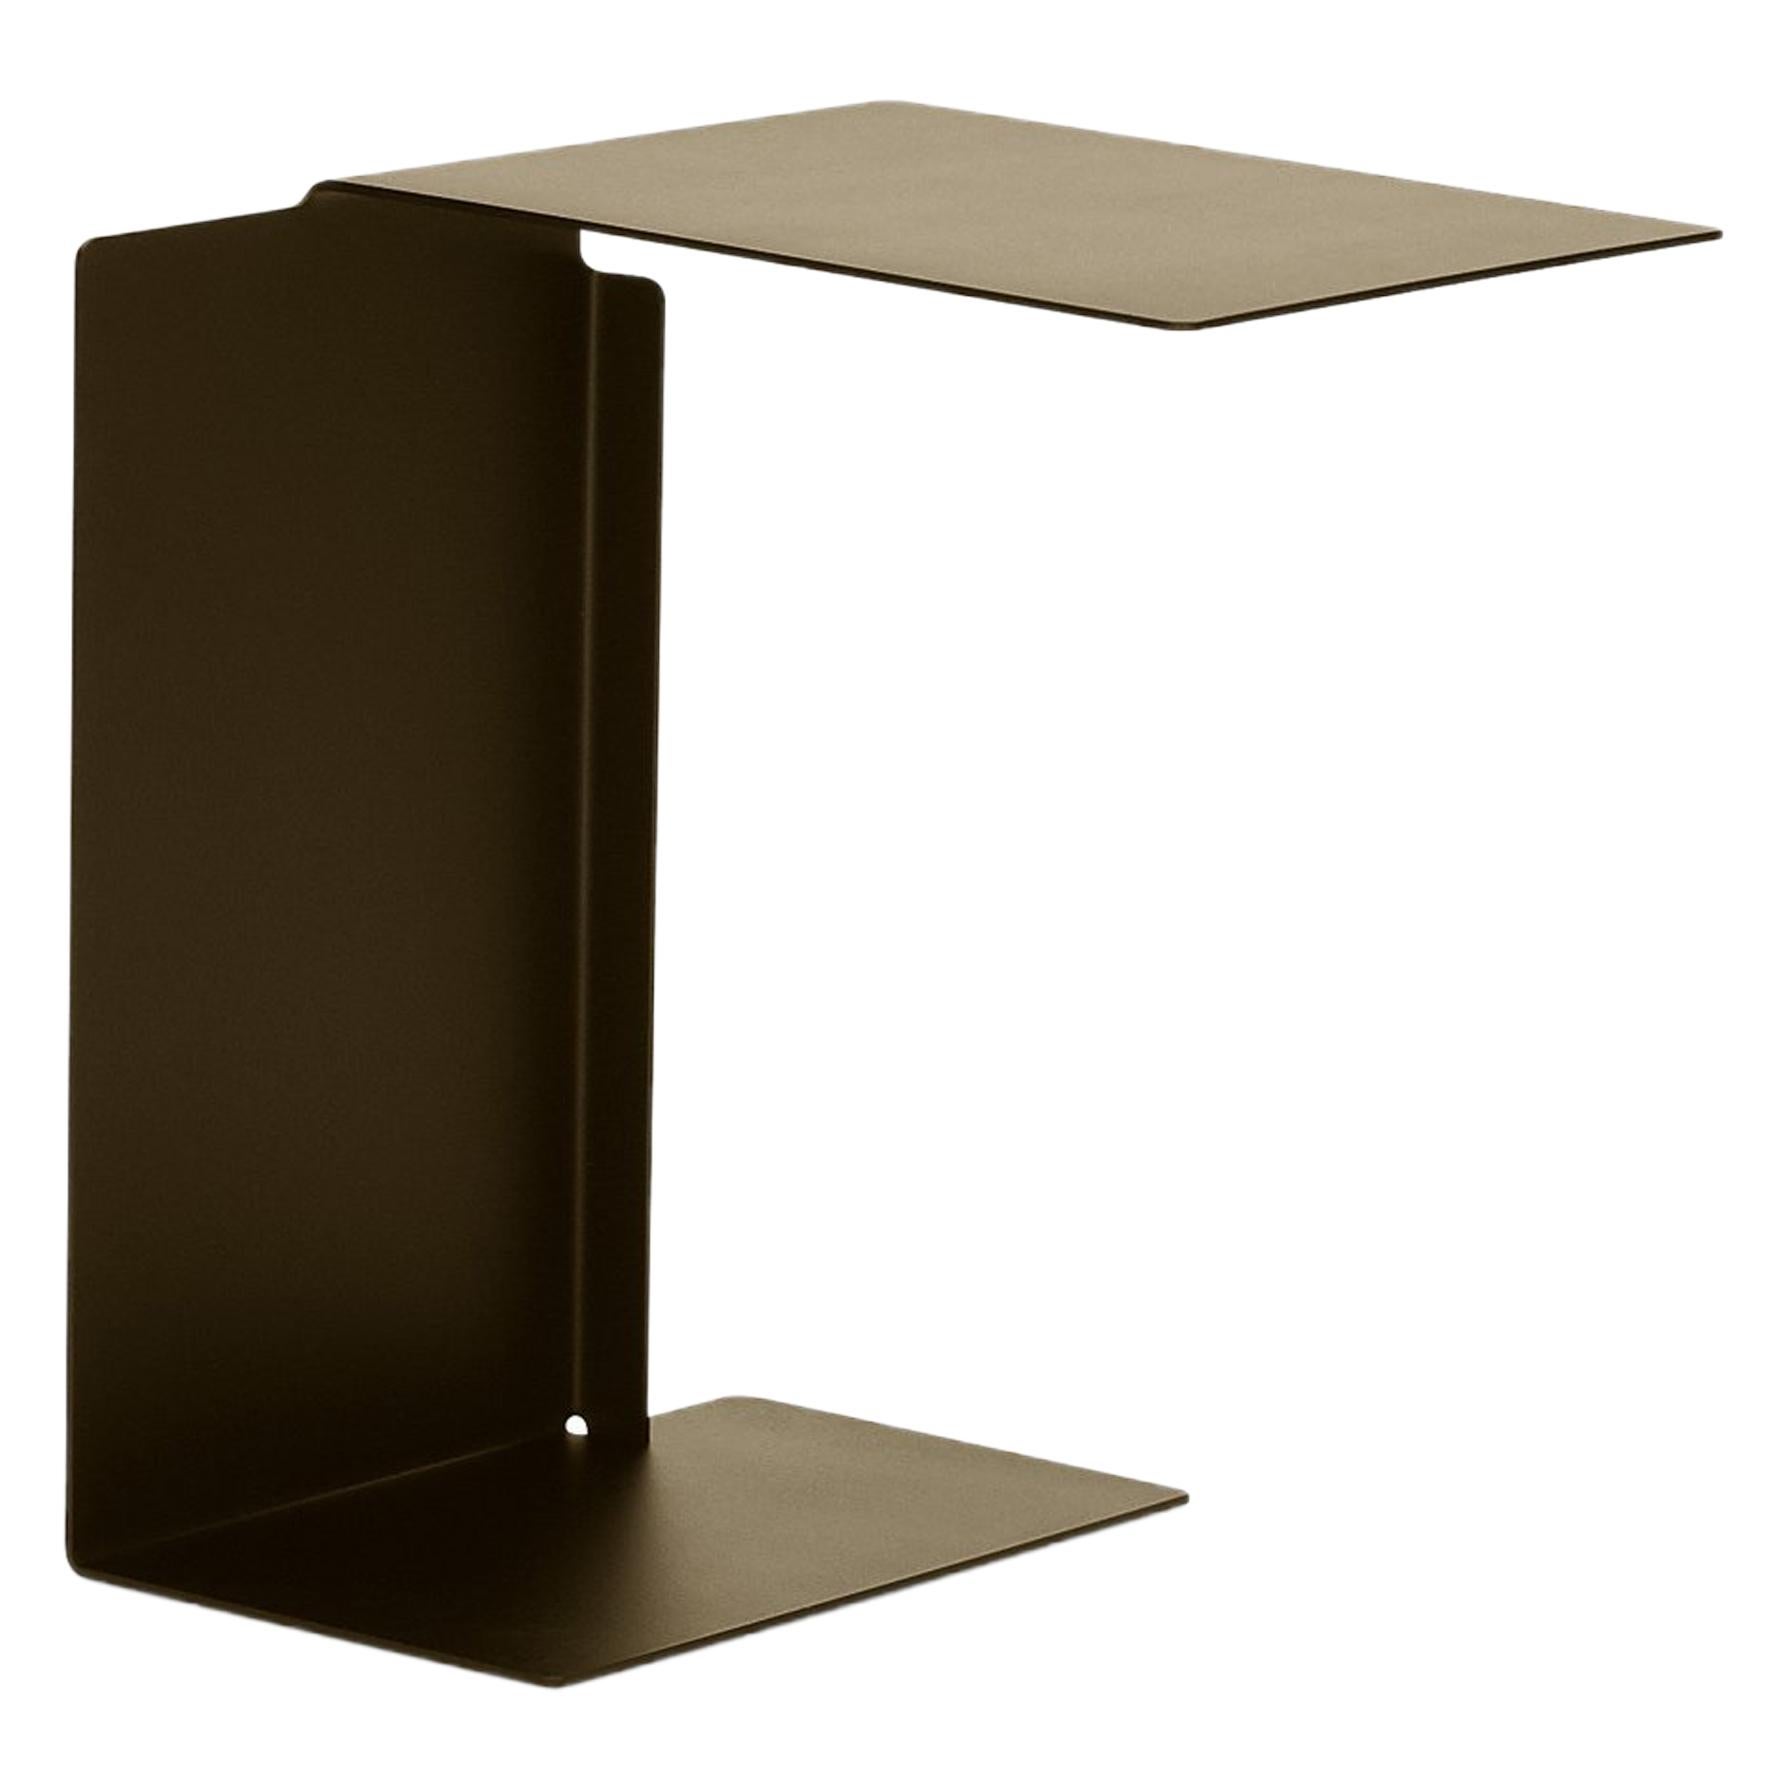 ClassiCon Diana B Side Table in Bronze Brown by Konstantin Grcic